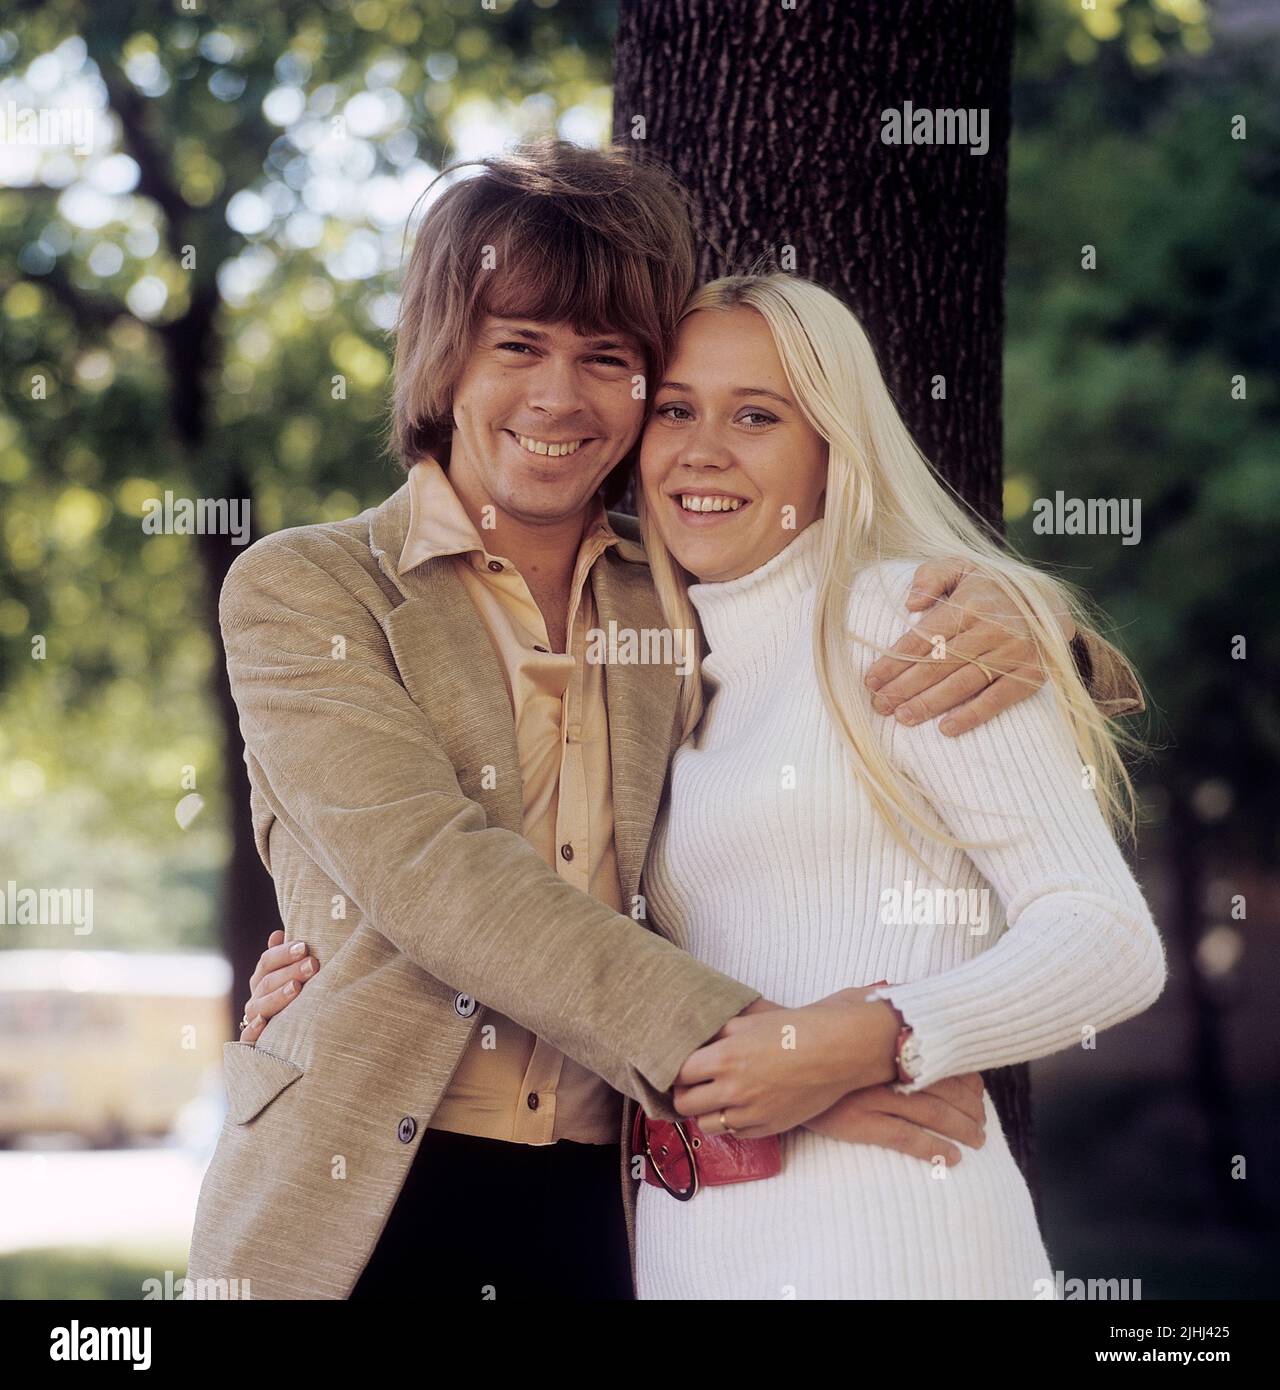 ABBA. Agnetha Fältskog. Singer. Member of the pop group ABBA. Born 1950. Pictured here with her fiance Björn Ulvaeus 1970 whom she married on 6 July 1971. Stock Photo